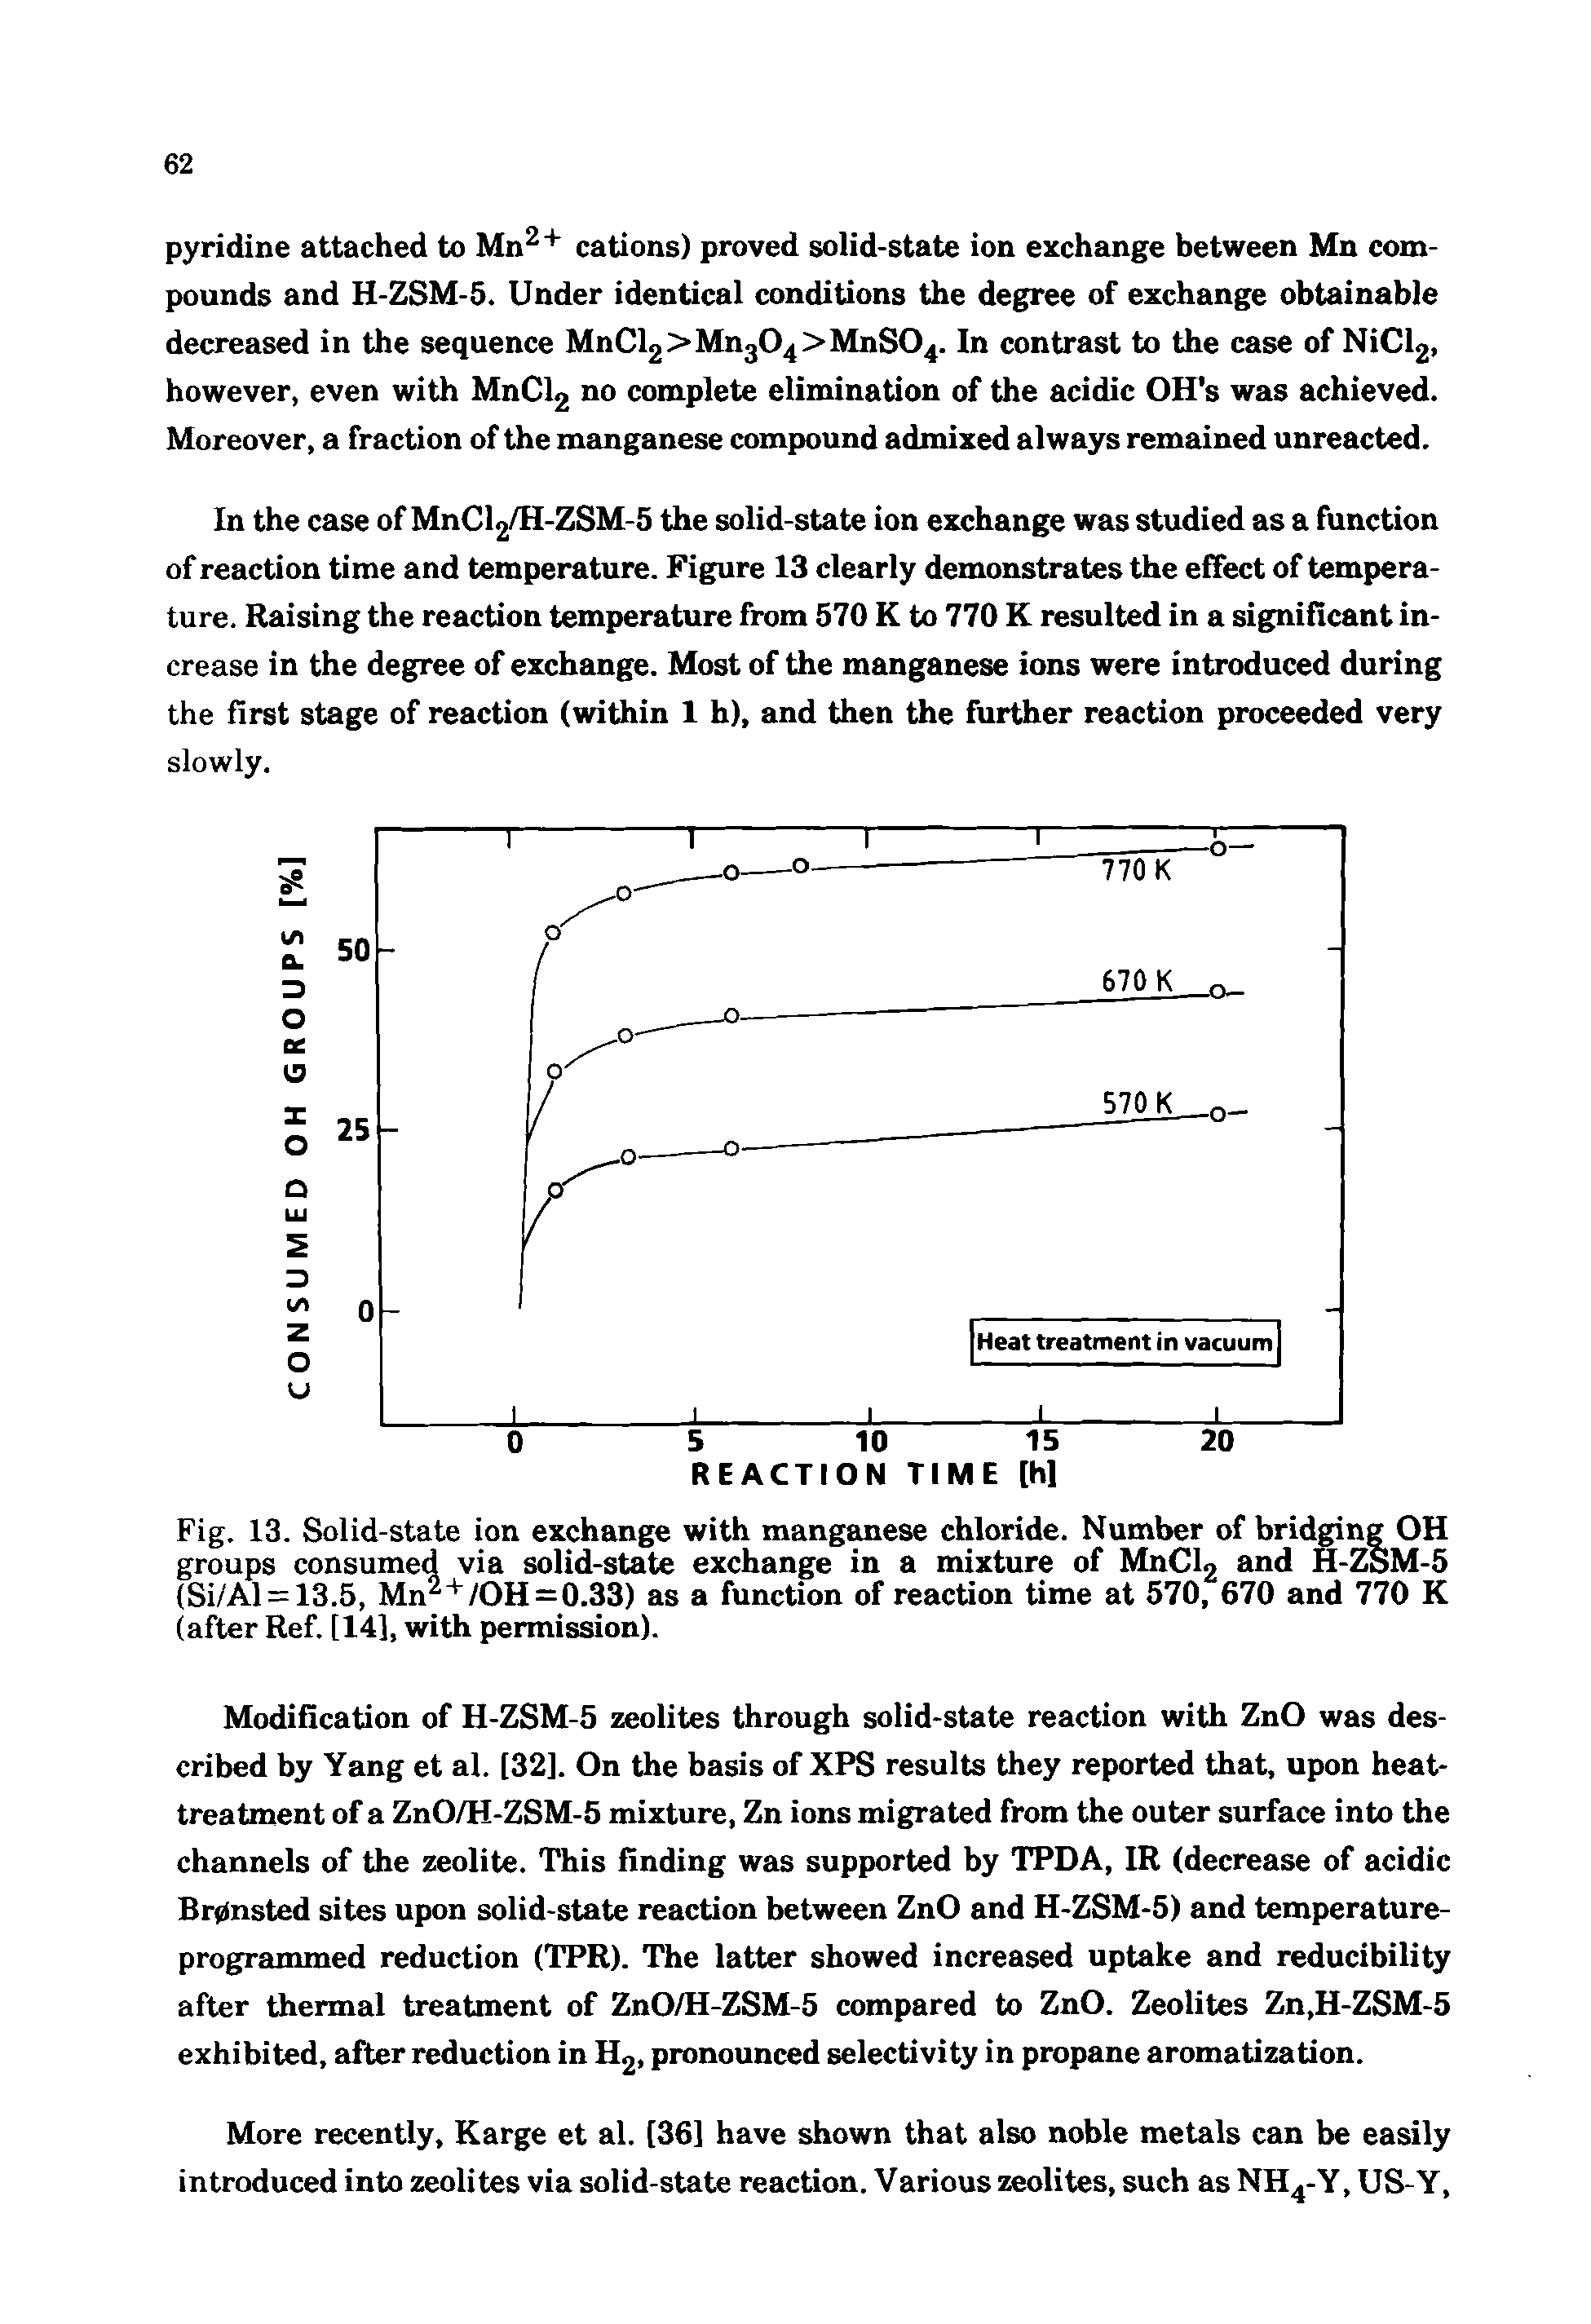 Fig. 13. Solid-state ion exchange with manganese chloride. Number of bridging OH groups consumed via solid-state exchange in a mixture of MnCl2 and H-ZSM-5 (Si/Al = 13.5, Mn +/OH=0.33) as a function of reaction time at 570, 670 and 770 K Ufter Ref. [14], with permission).